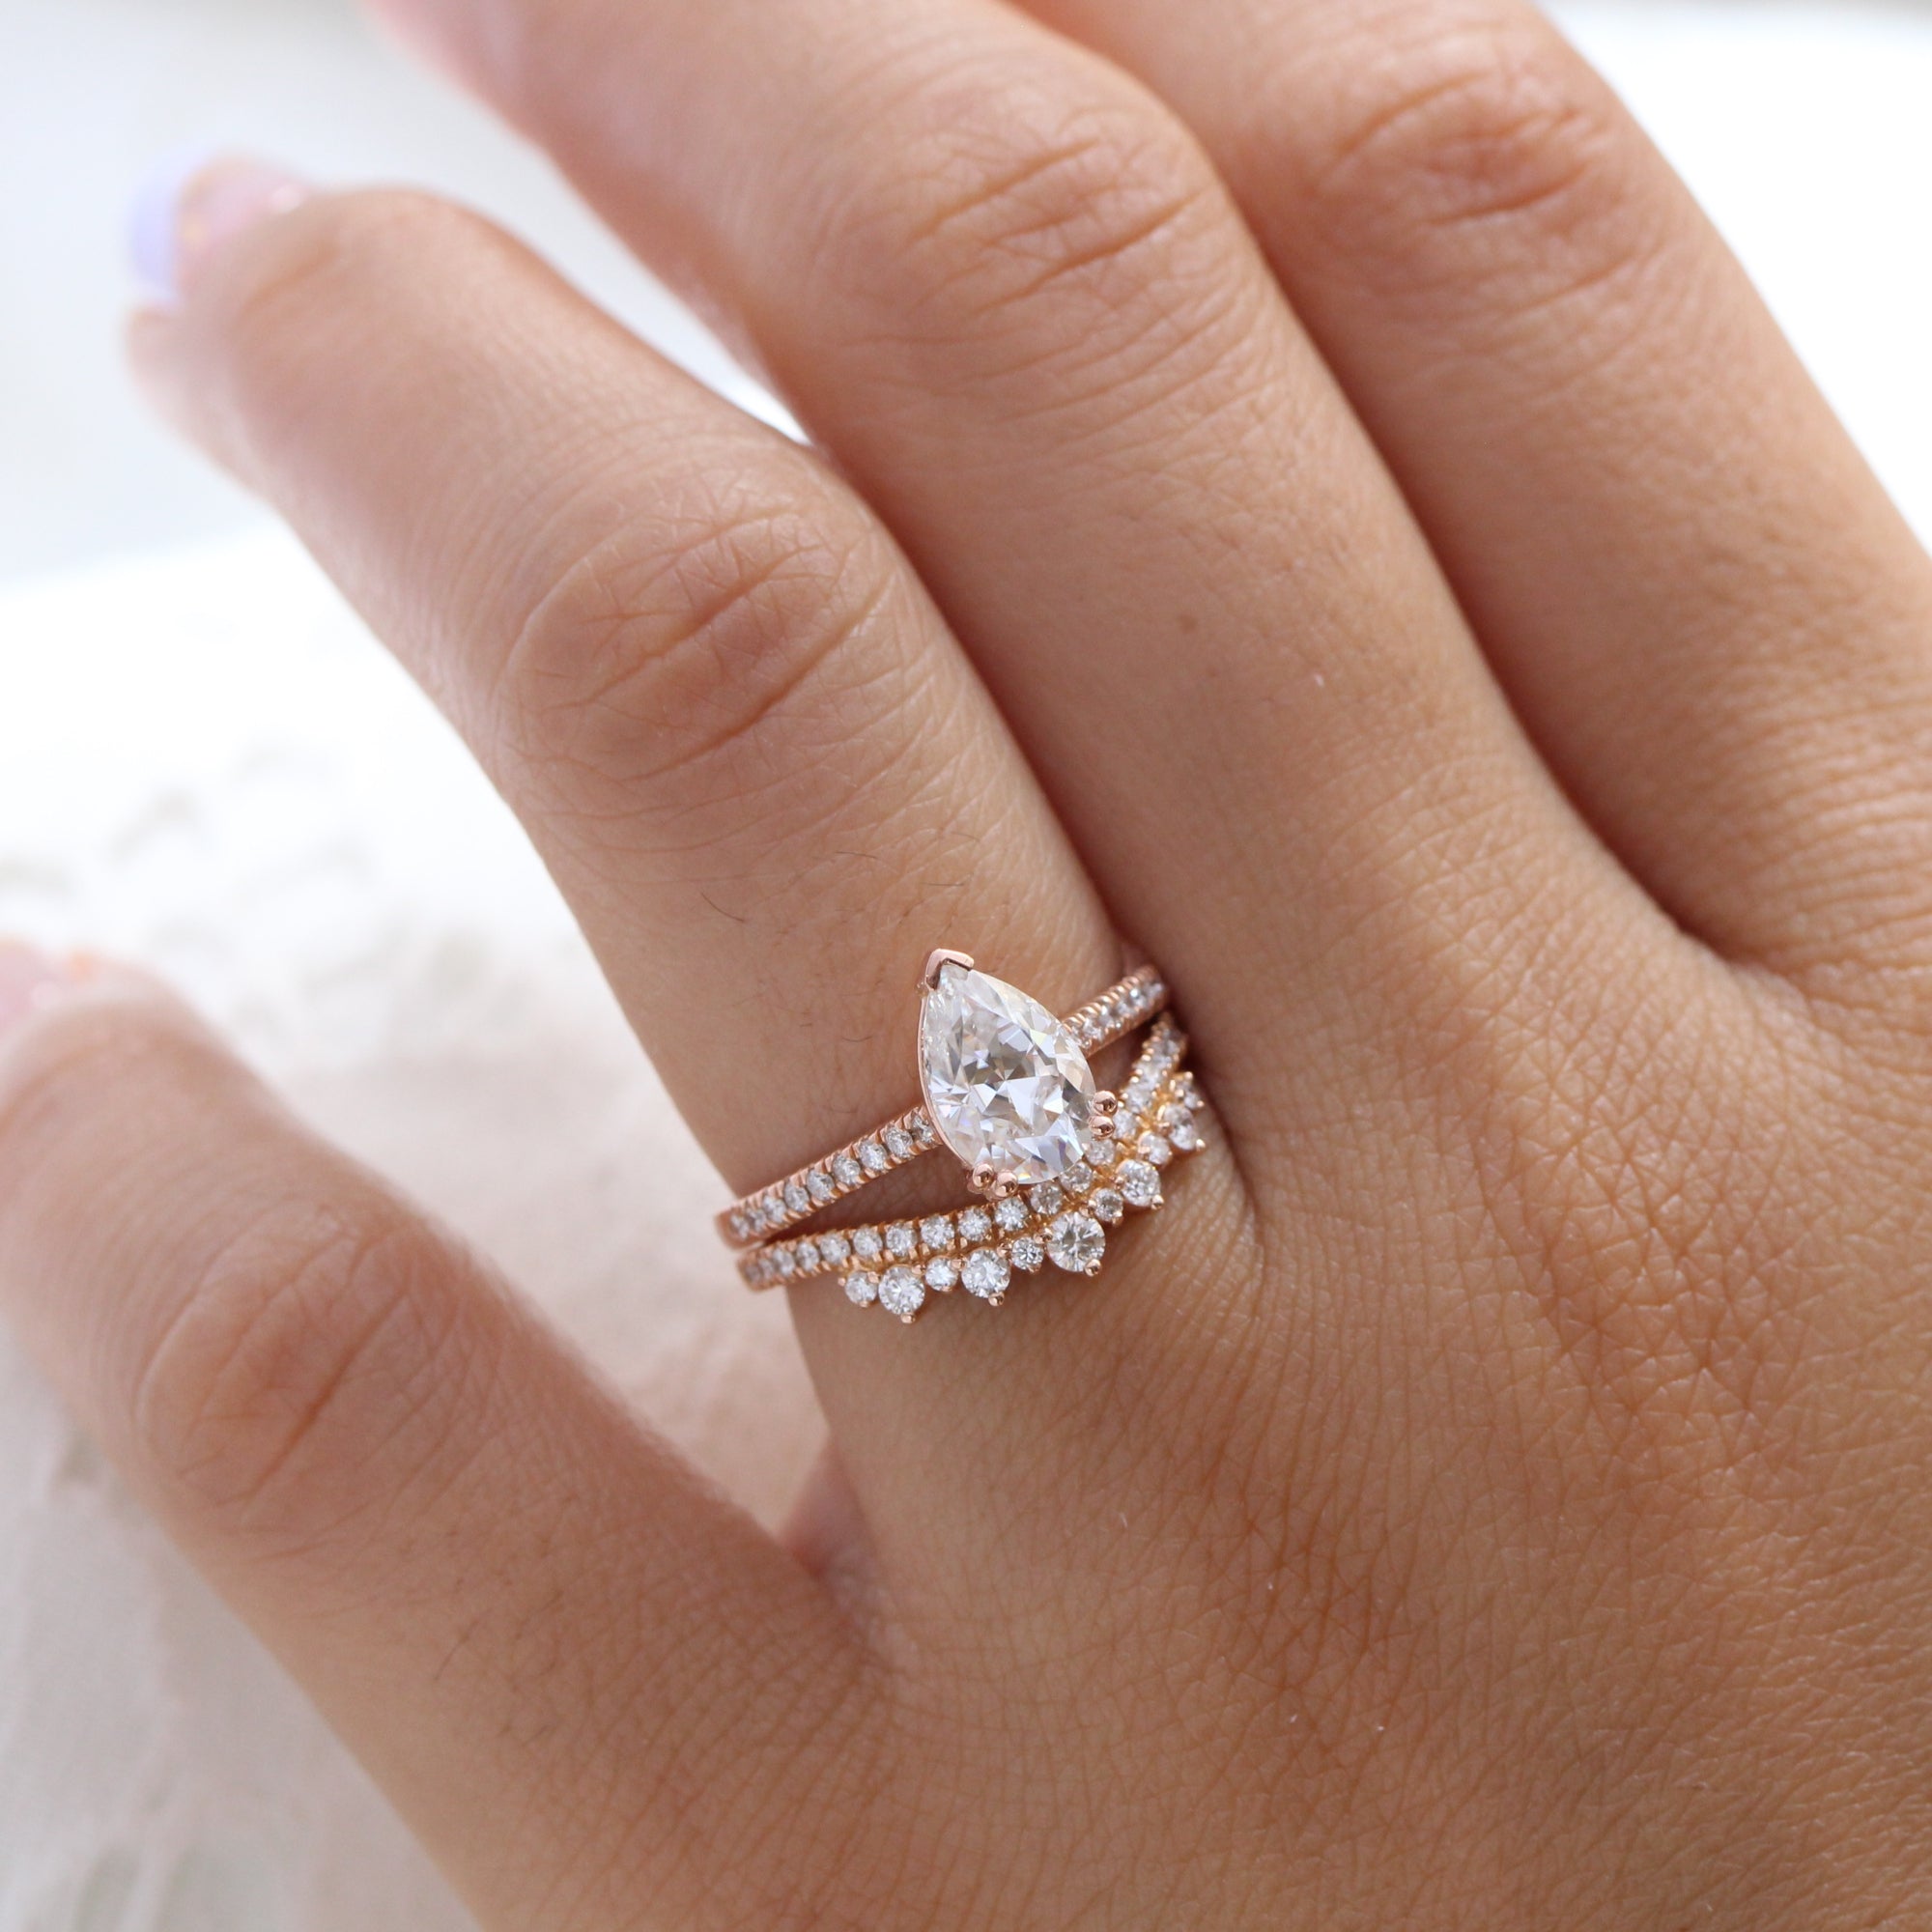 Solitaire Pear Moissanite Wedding Ring Set